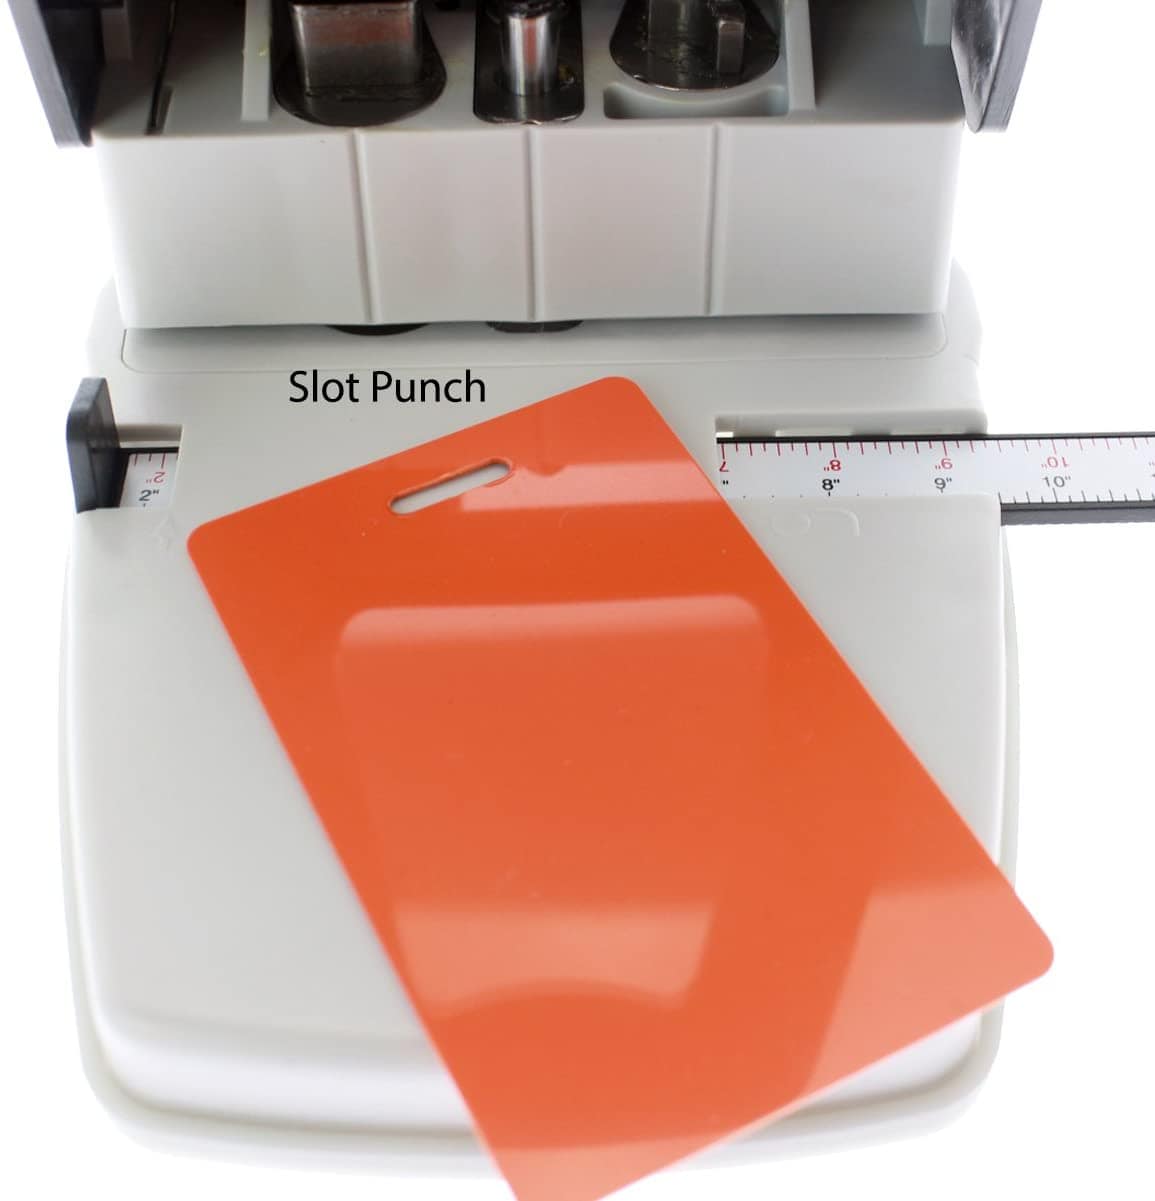 3-in-1 ID Badge Slot Punch for ID Cards (Works with All PVC Cards and ID Card Printers) Black